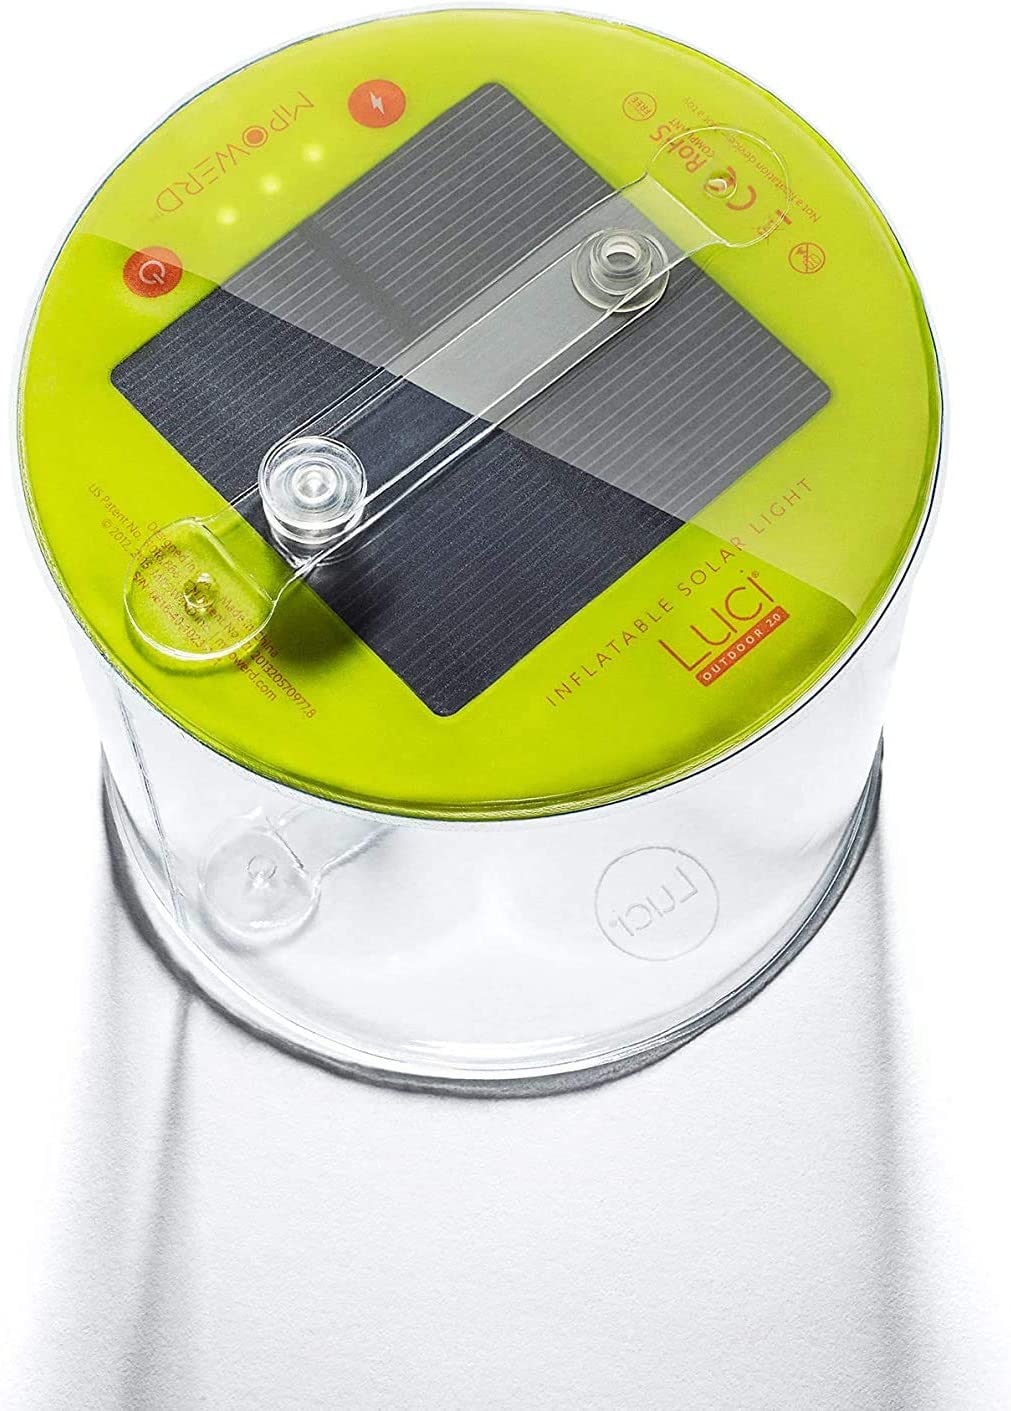 Luci Pro Inflatabe Solar with USB BeReadyFoods.com